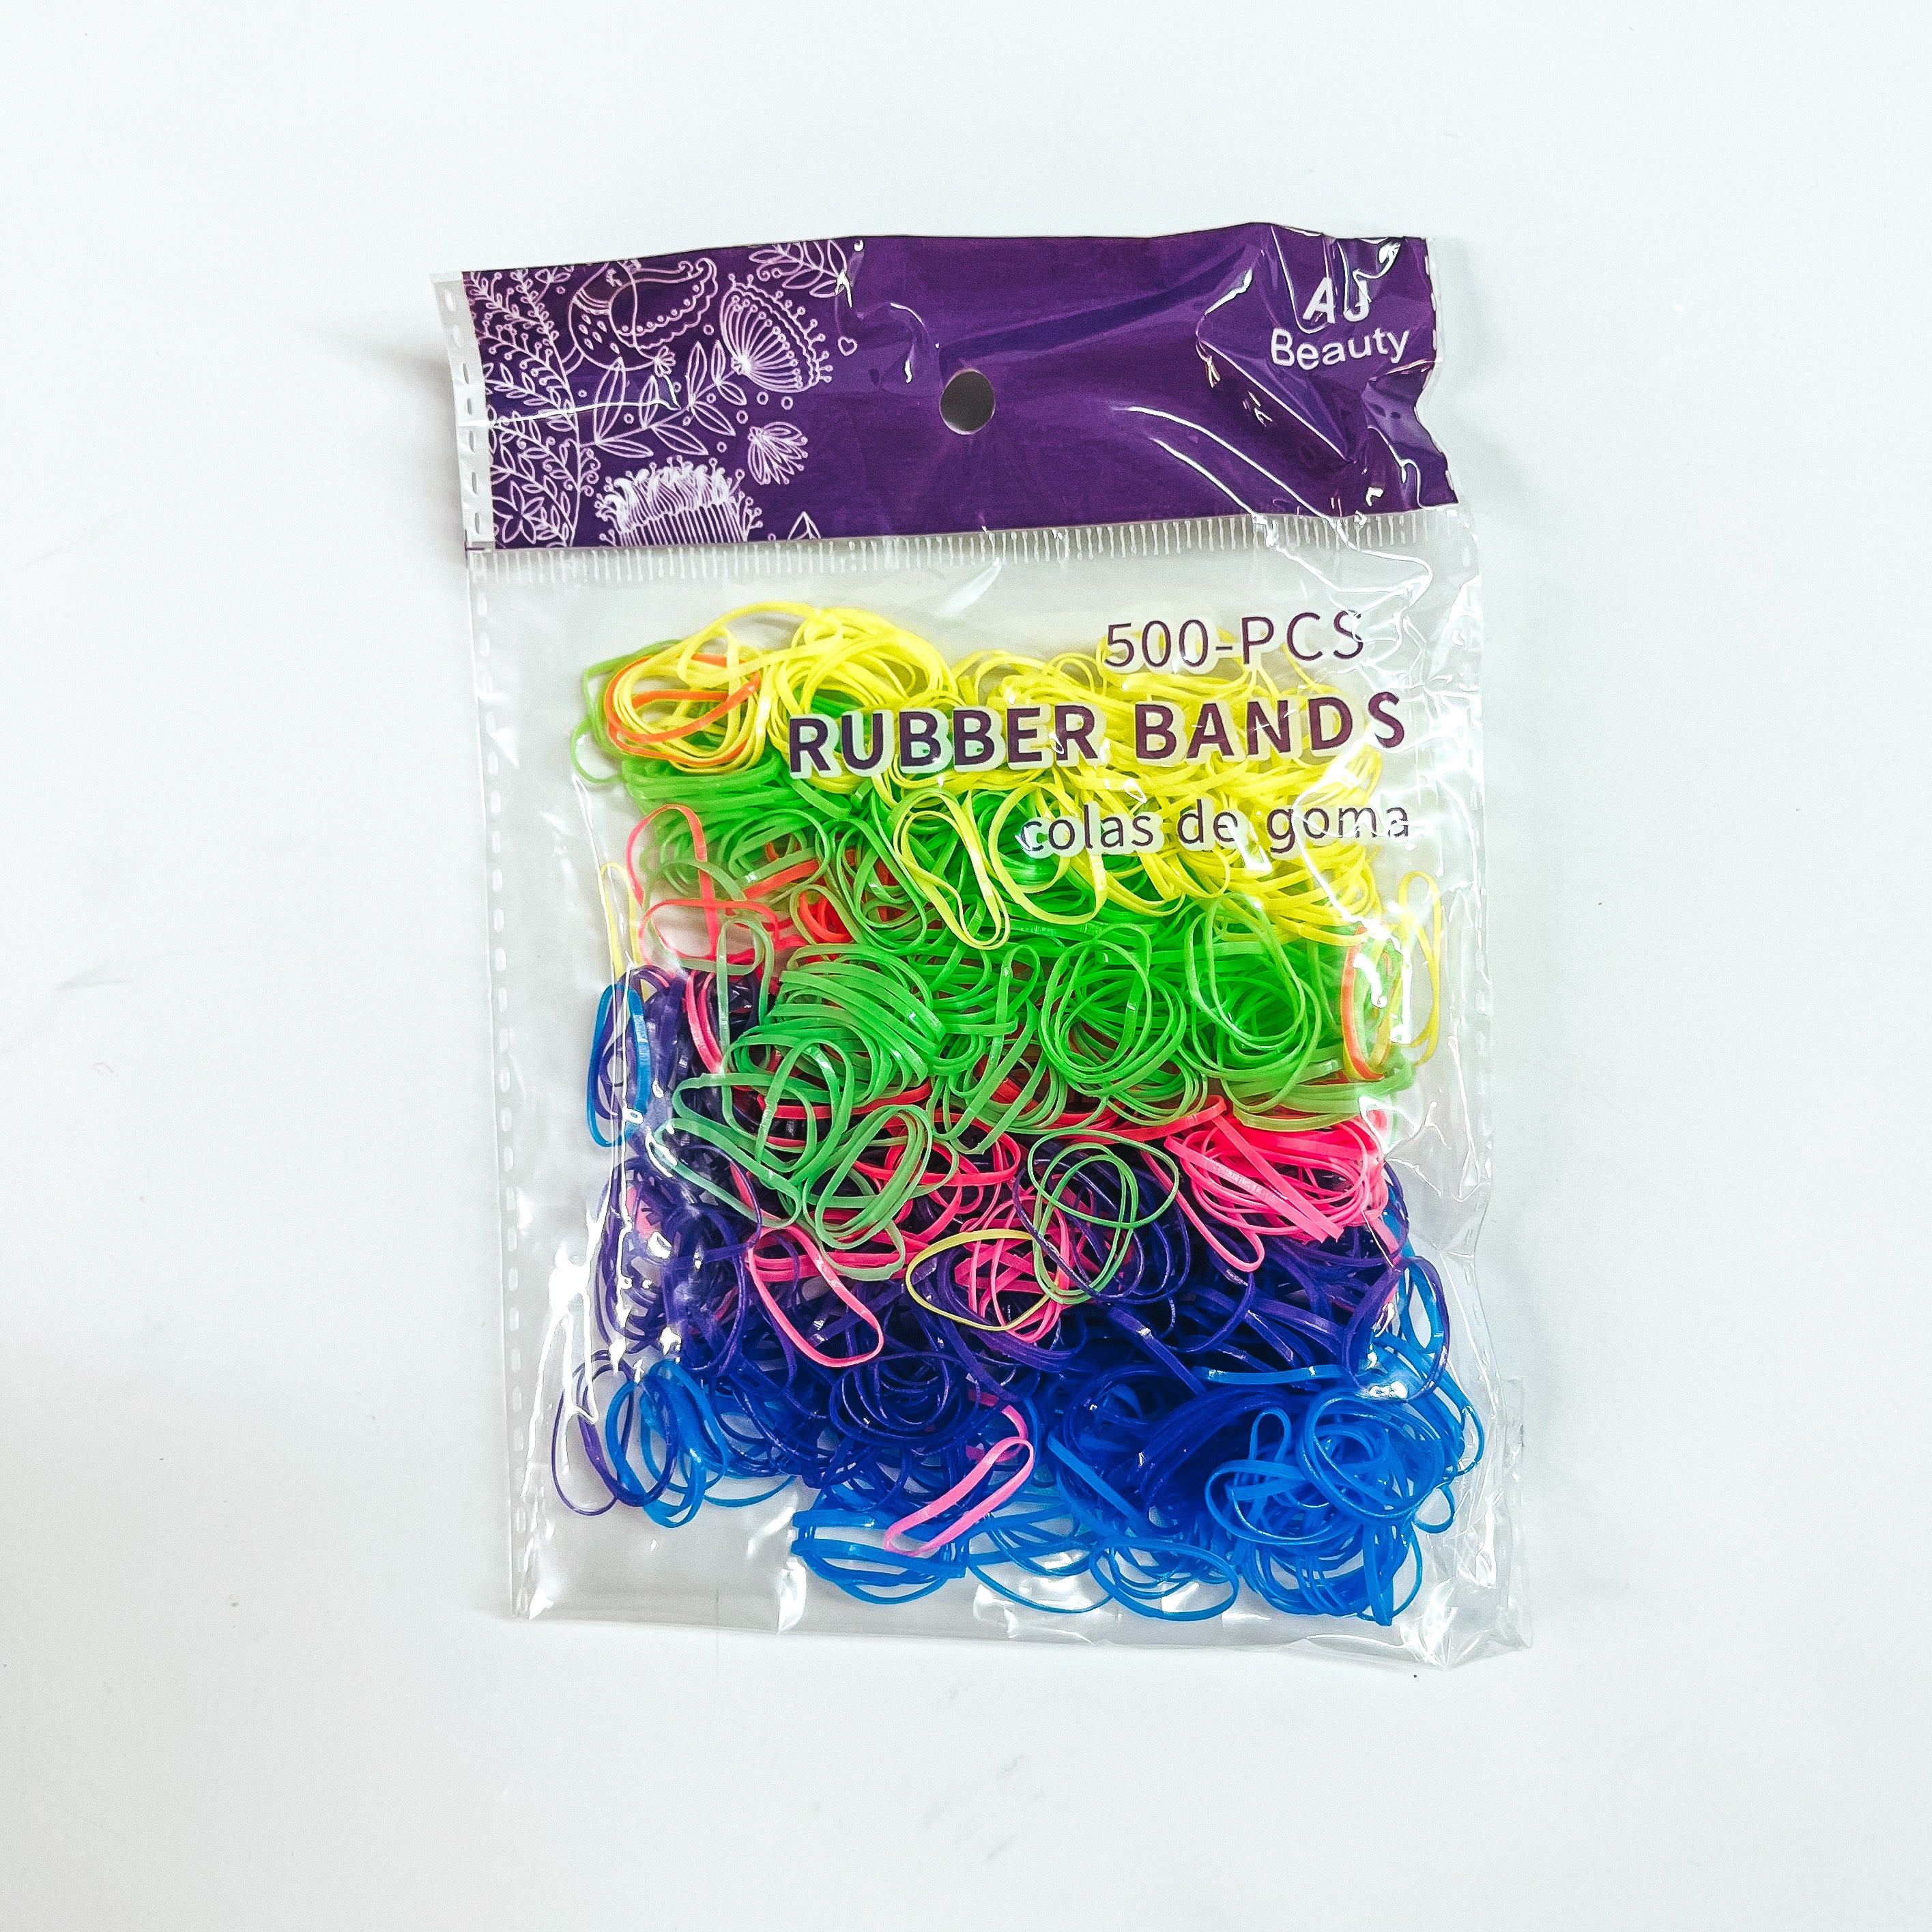 This is a pack of 500 small rubber bands in different colors such as neon yellow,  neon green, pink, dark blue and blue. This clear and purple pack is taken on a white background.